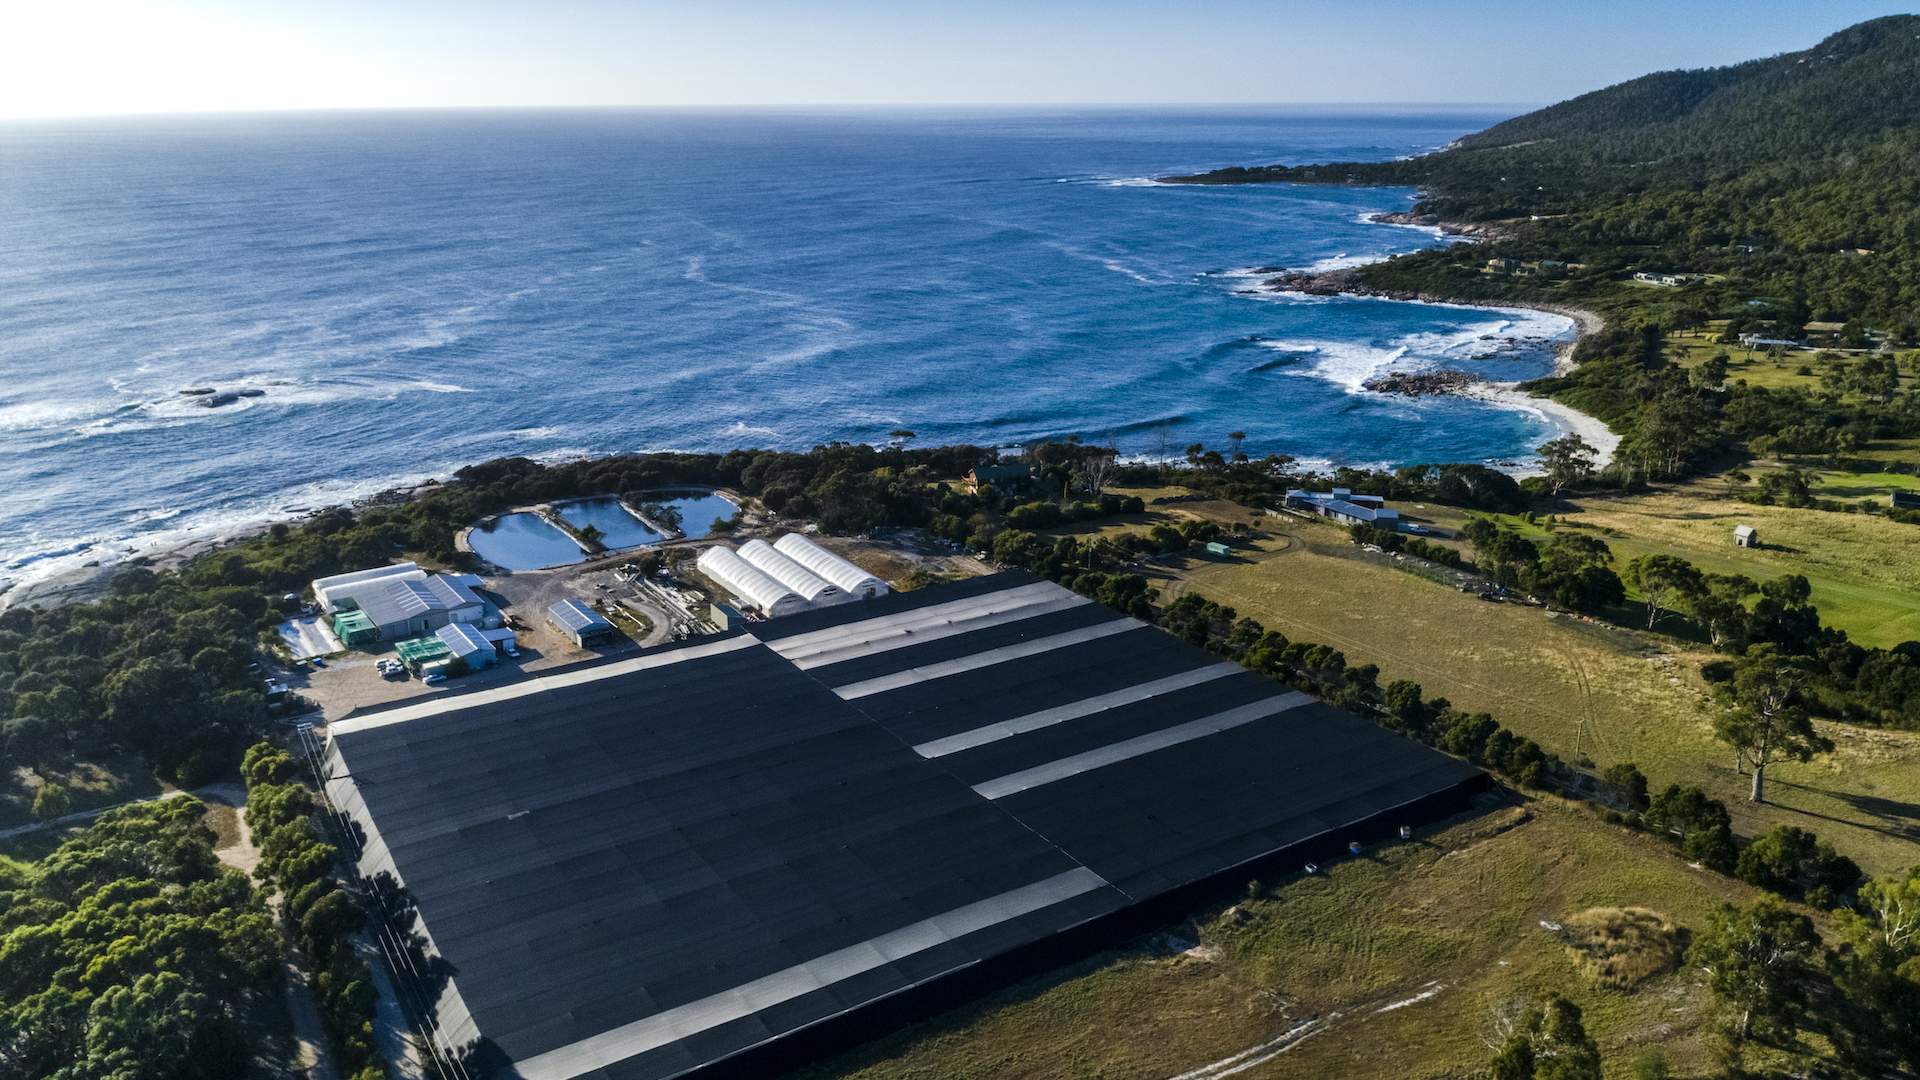 How This Australian Farm Combines Tech with the Natural Cycle of the Ocean to Combat Overfishing